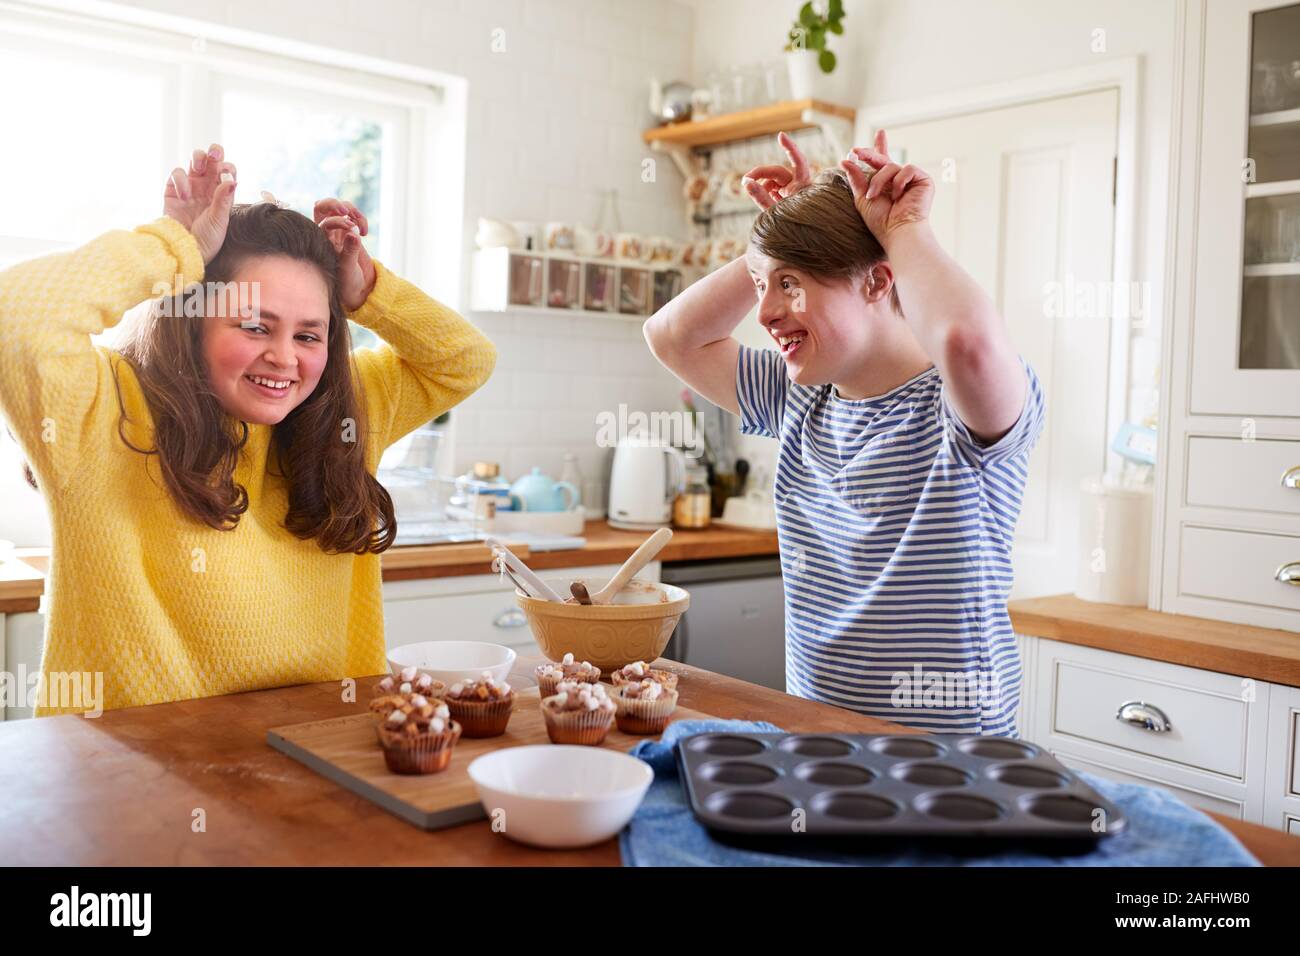 Young Downs Syndrome Couple Decorating Homemade Cupcakes With Marshmallows In Kitchen At Home Stock Photo